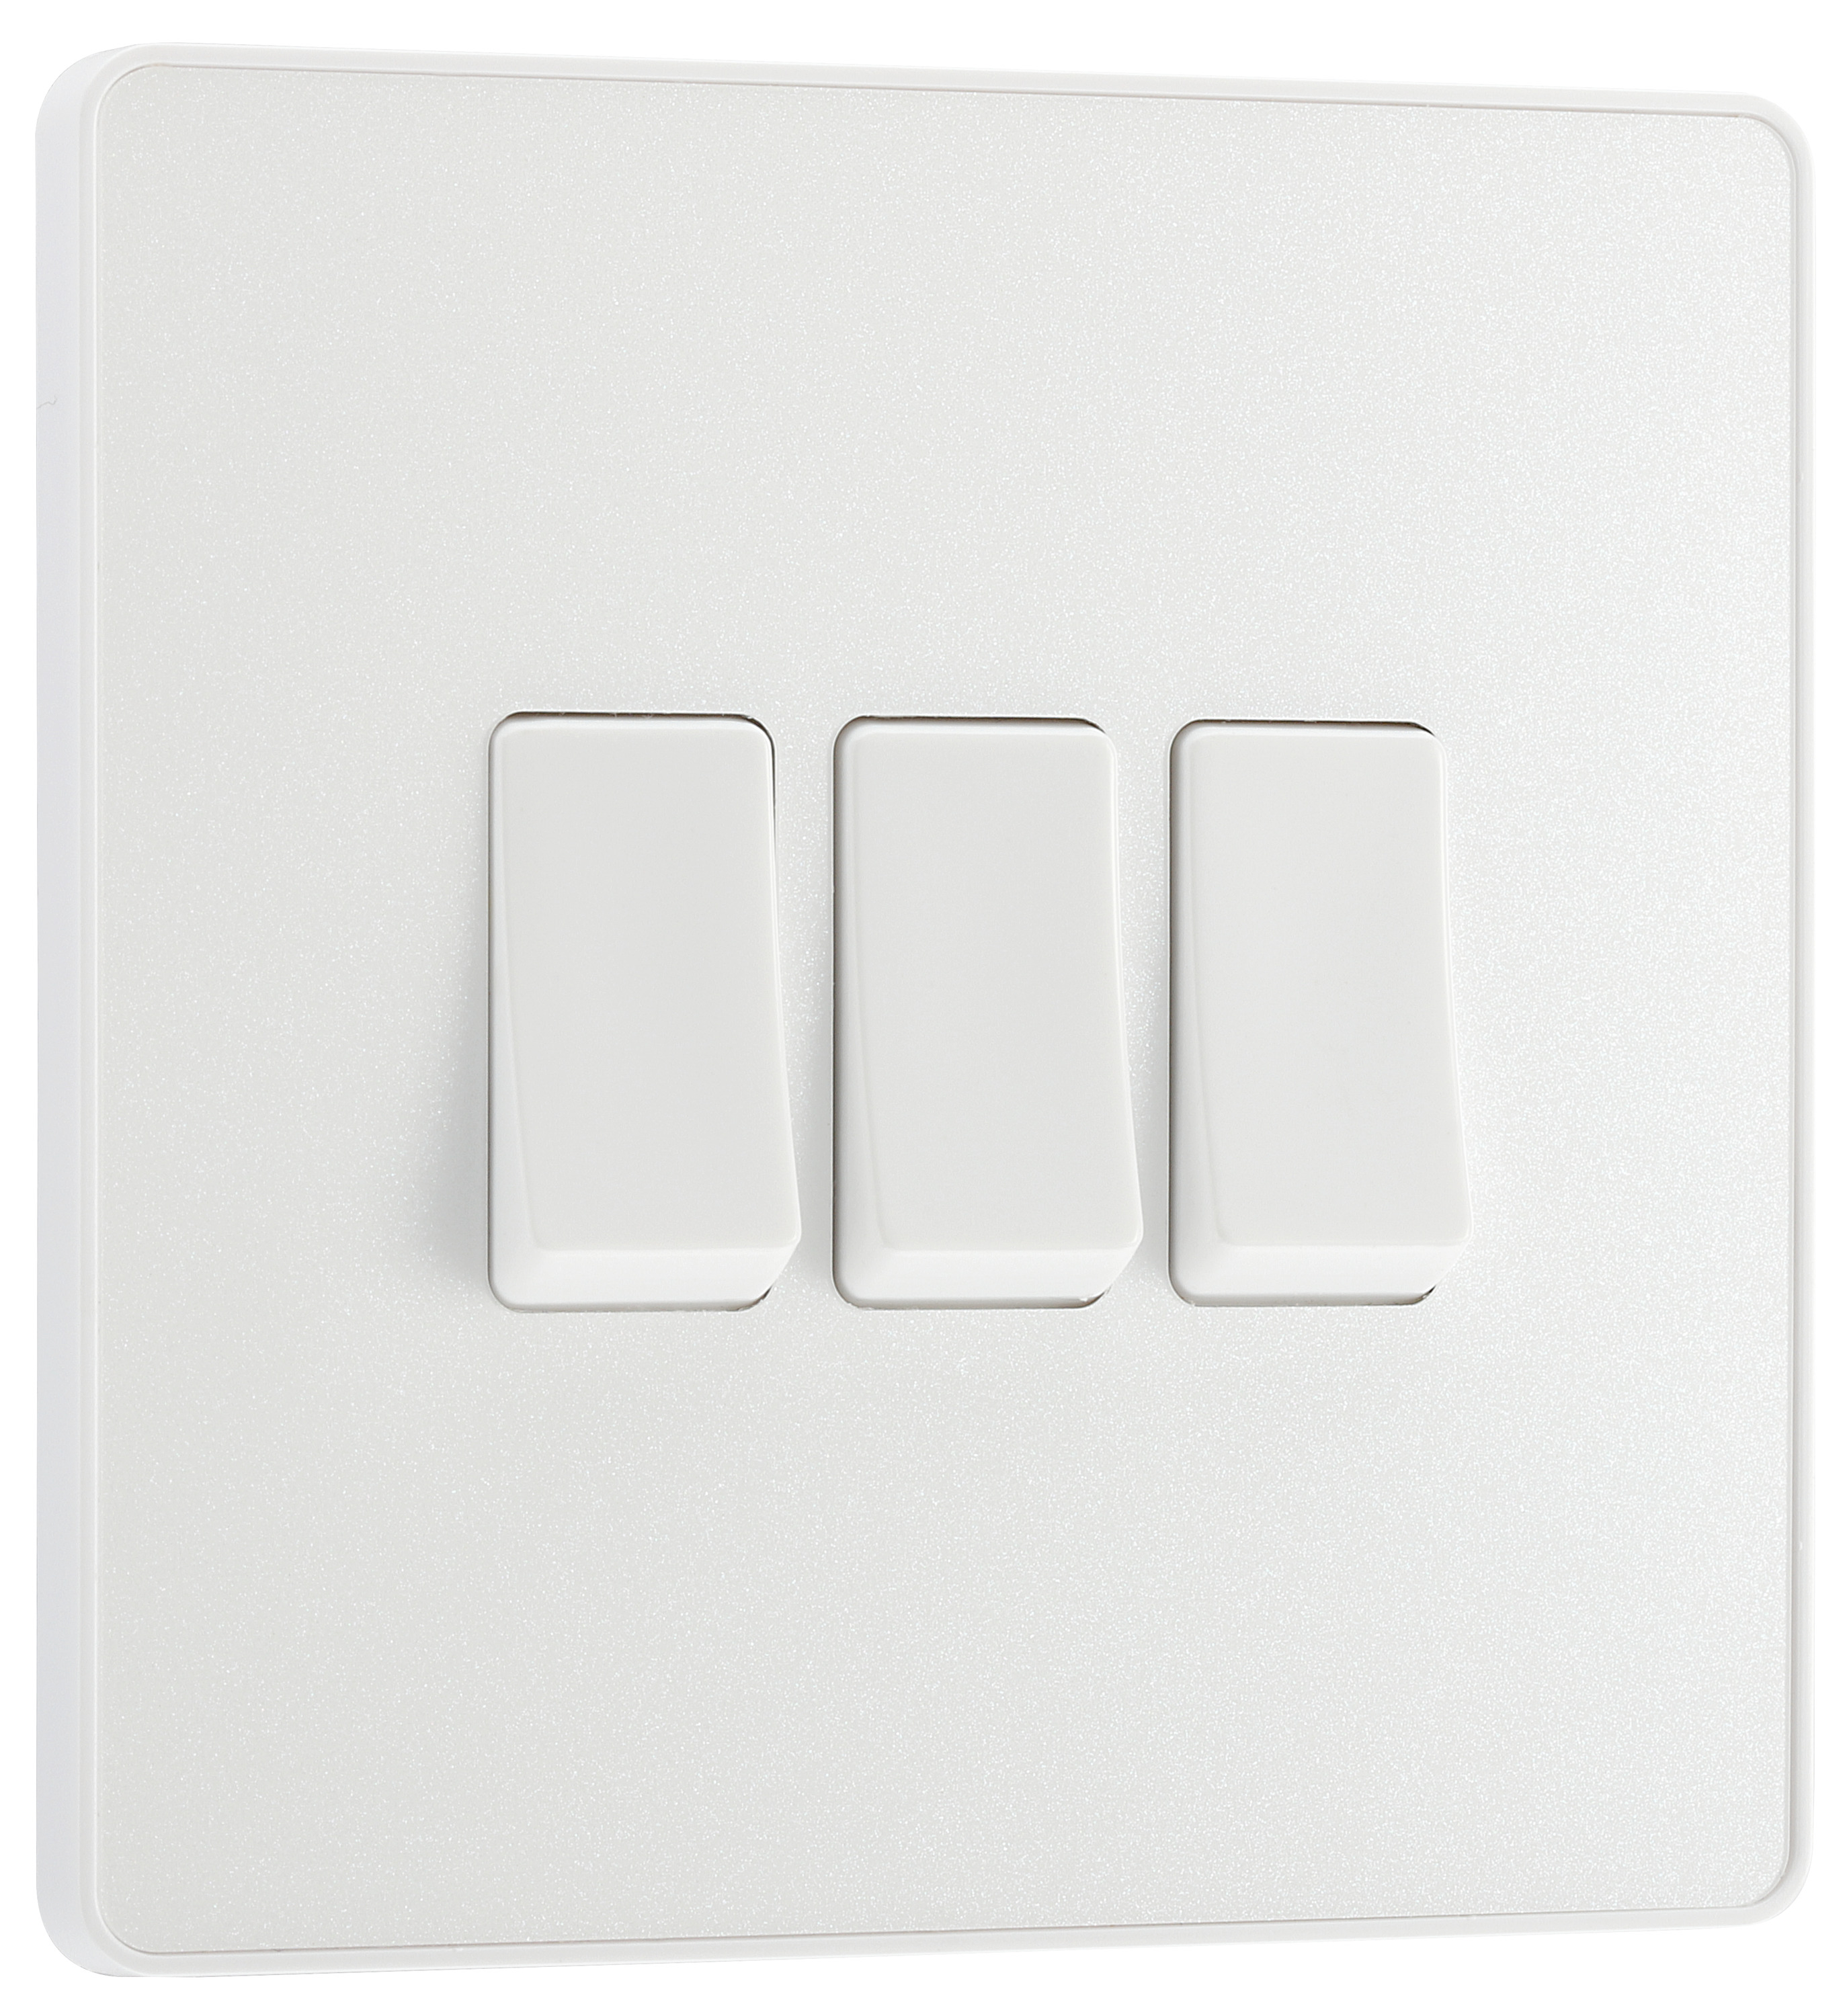 Image of BG Evolve Pearlescent White 20A 16Ax Triple Light Switch - 2 Way